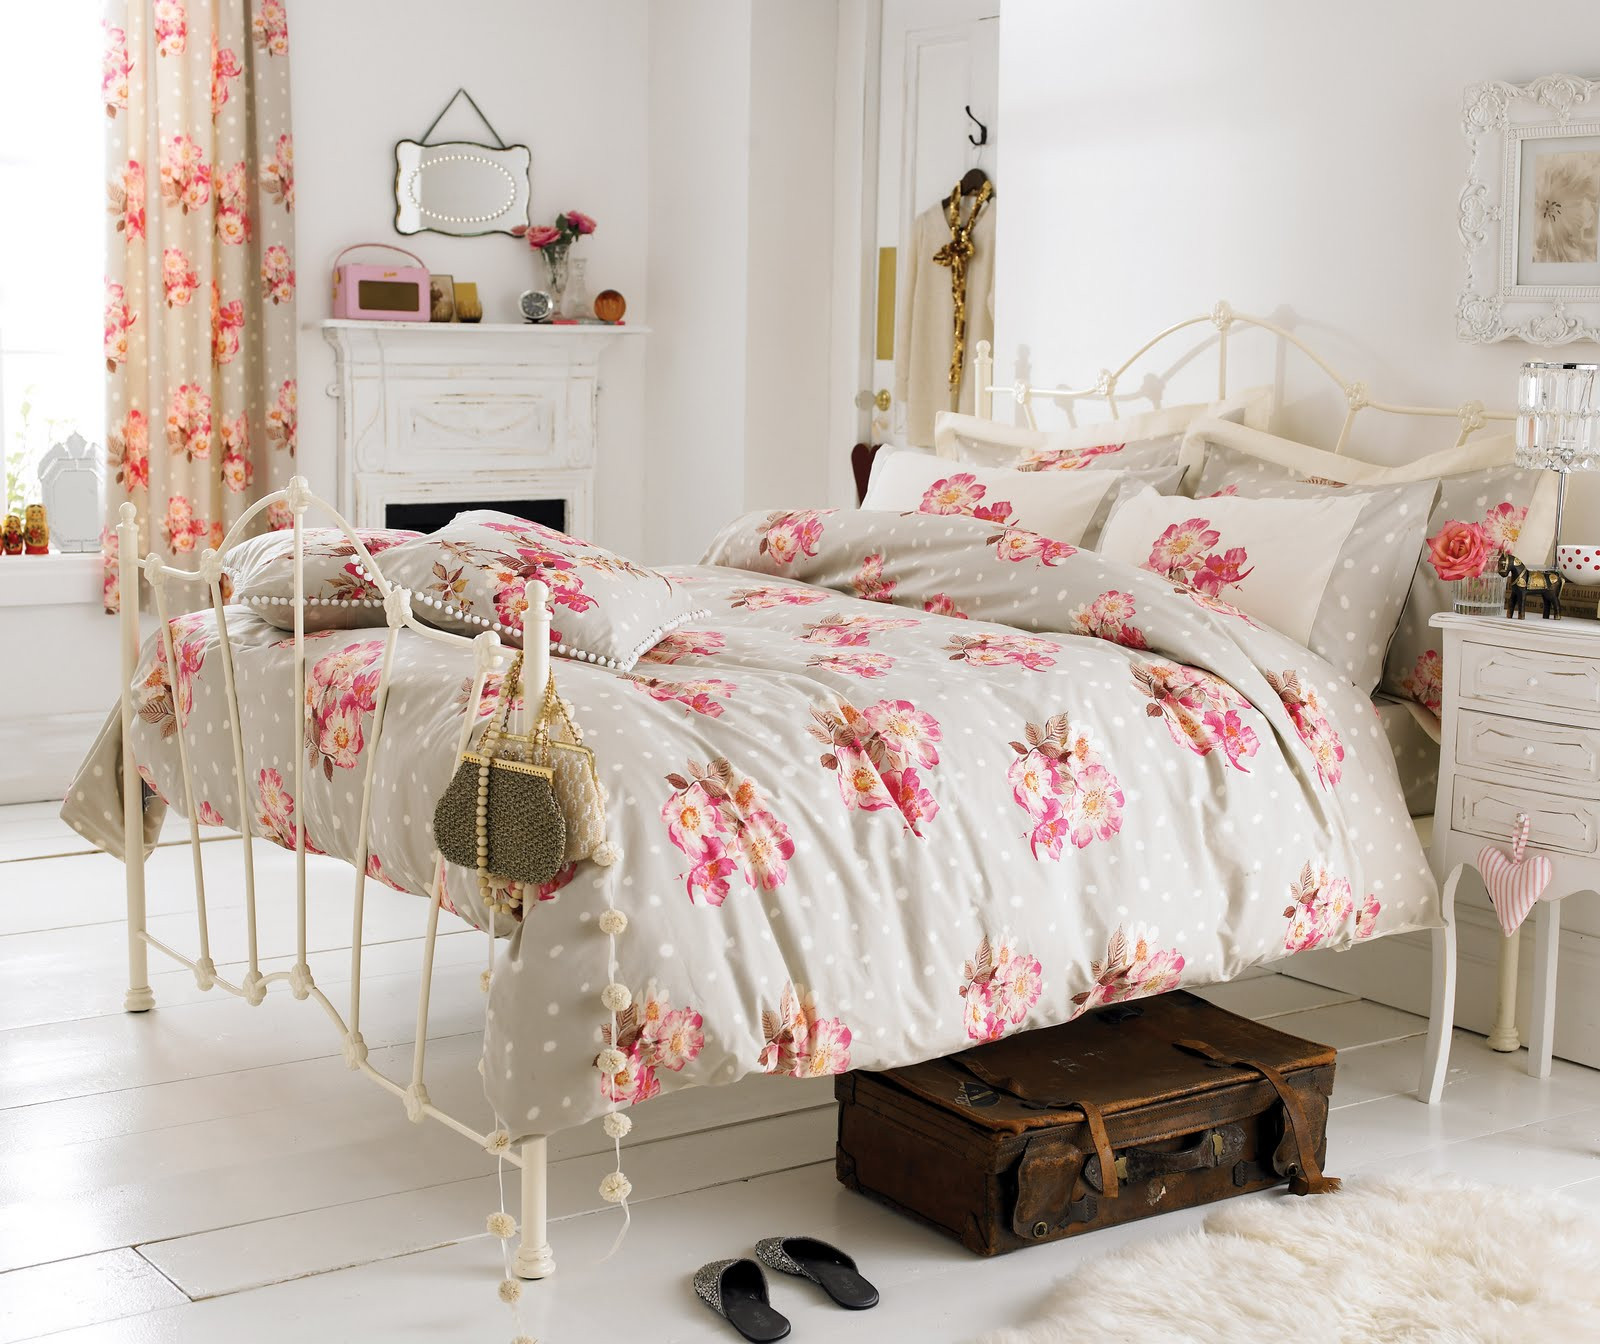 White Shabby Chic Bedroom
 50 Best Bedrooms With White Furniture for 2020